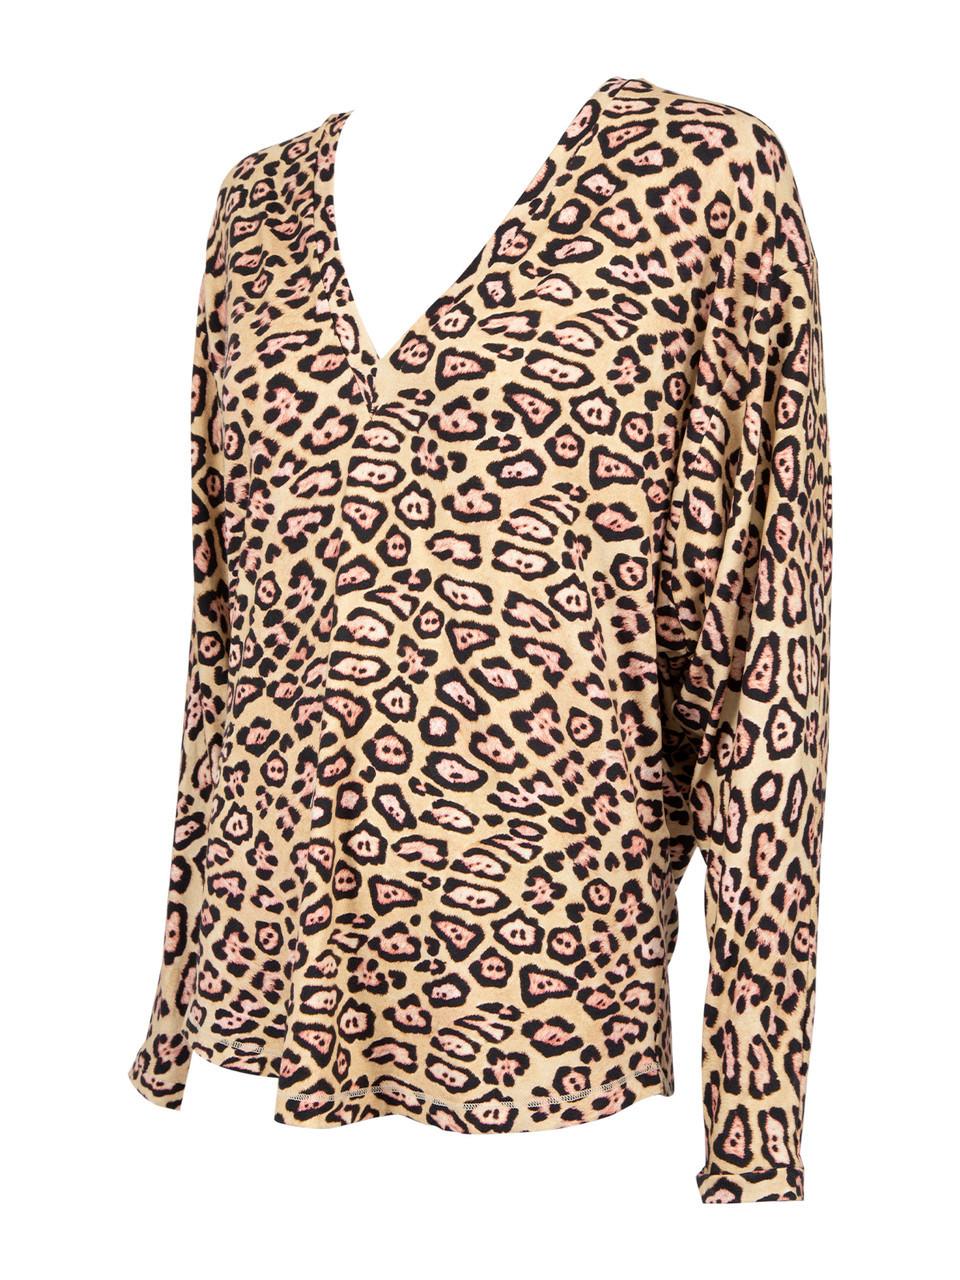 Pre-Loved Givenchy Women's Leopard Print Long Sleeved Blouse In Excellent Condition For Sale In London, GB